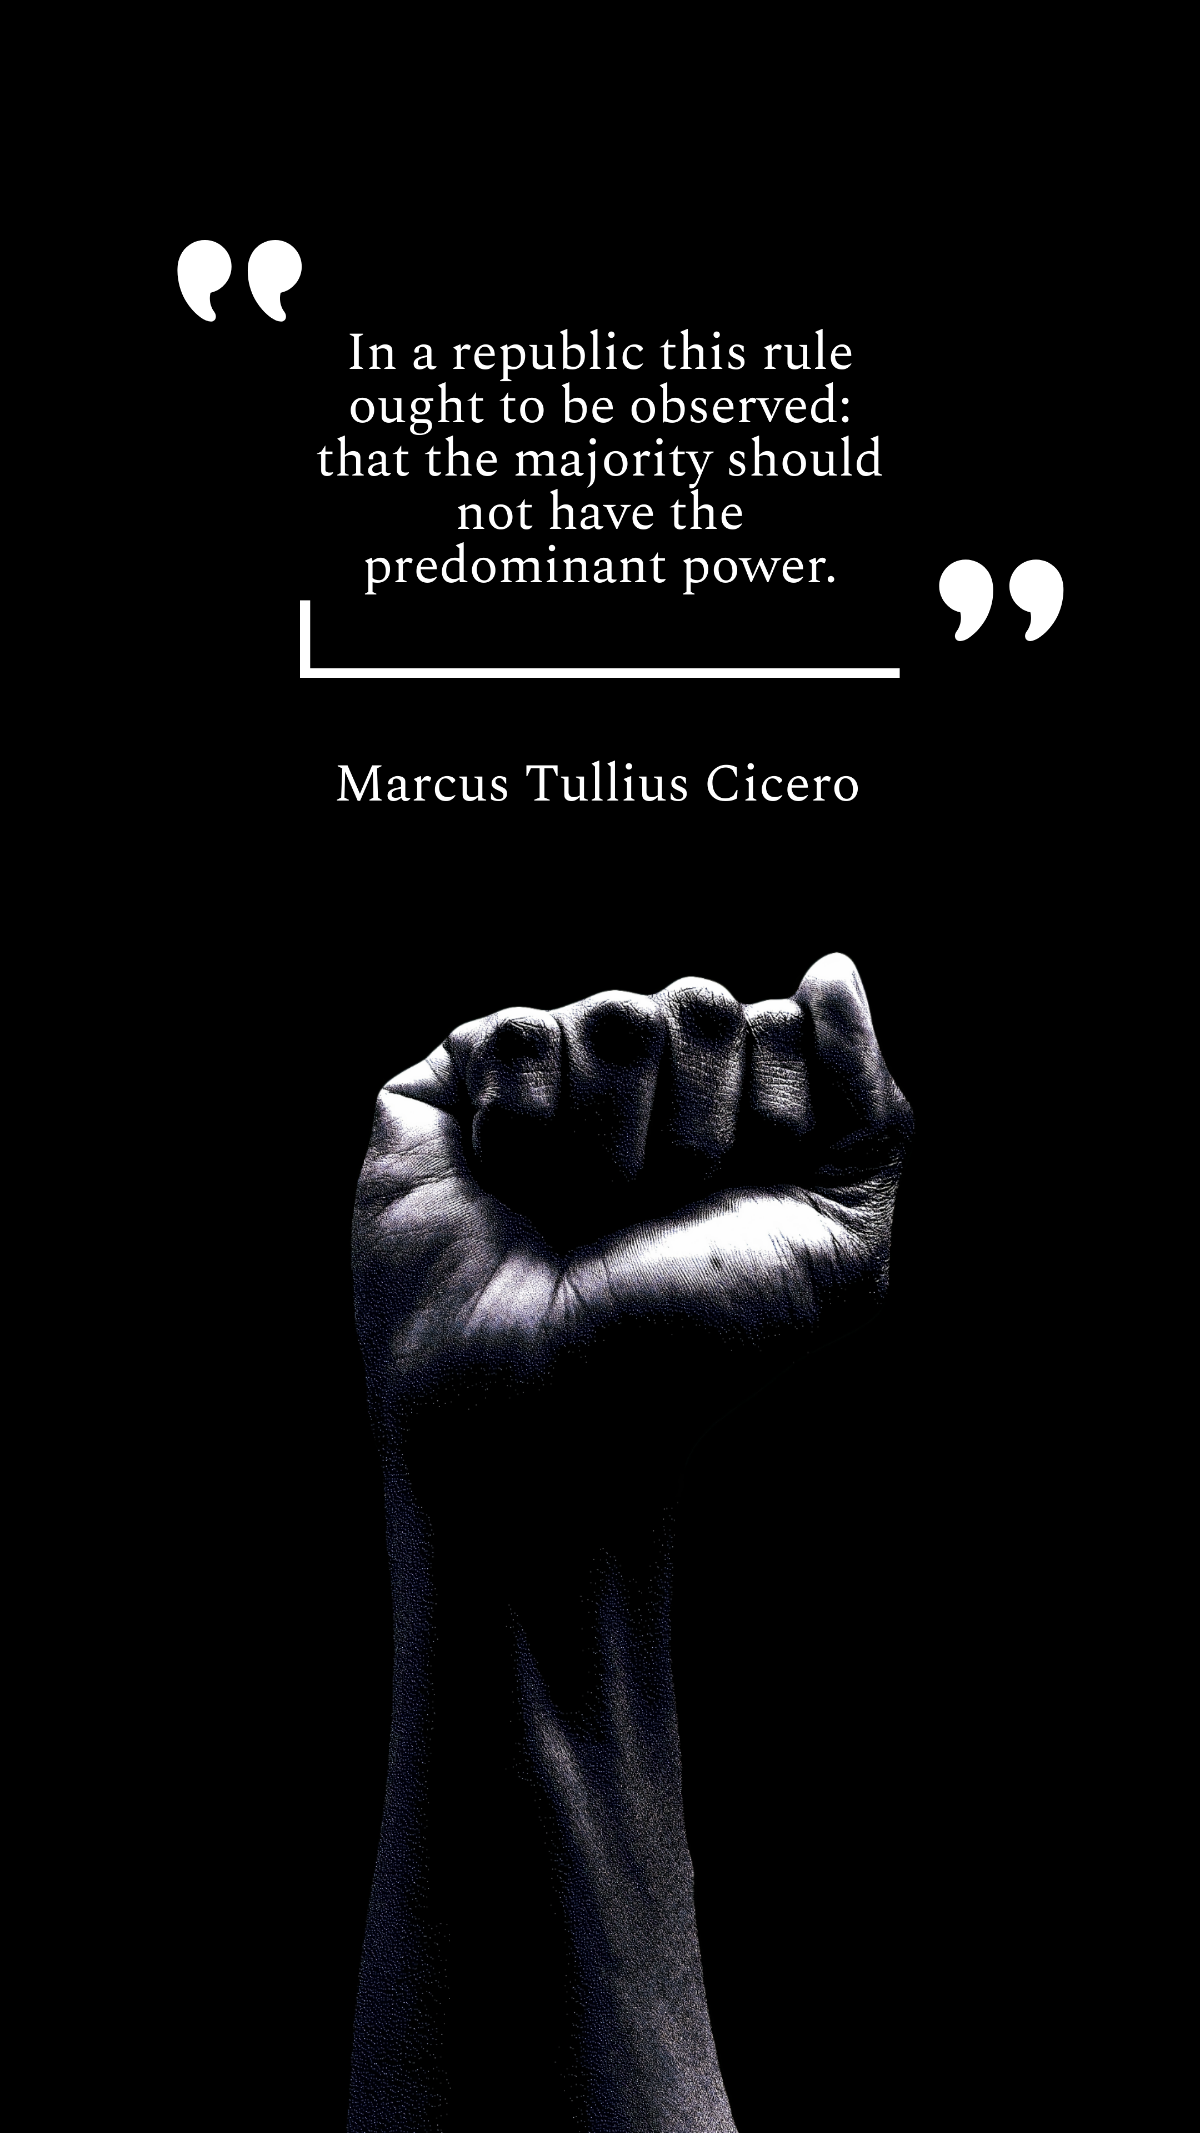 In a republic this rule ought to be observed: that the majority should not have the predominant power. - Marcus Tullius Cicero Template